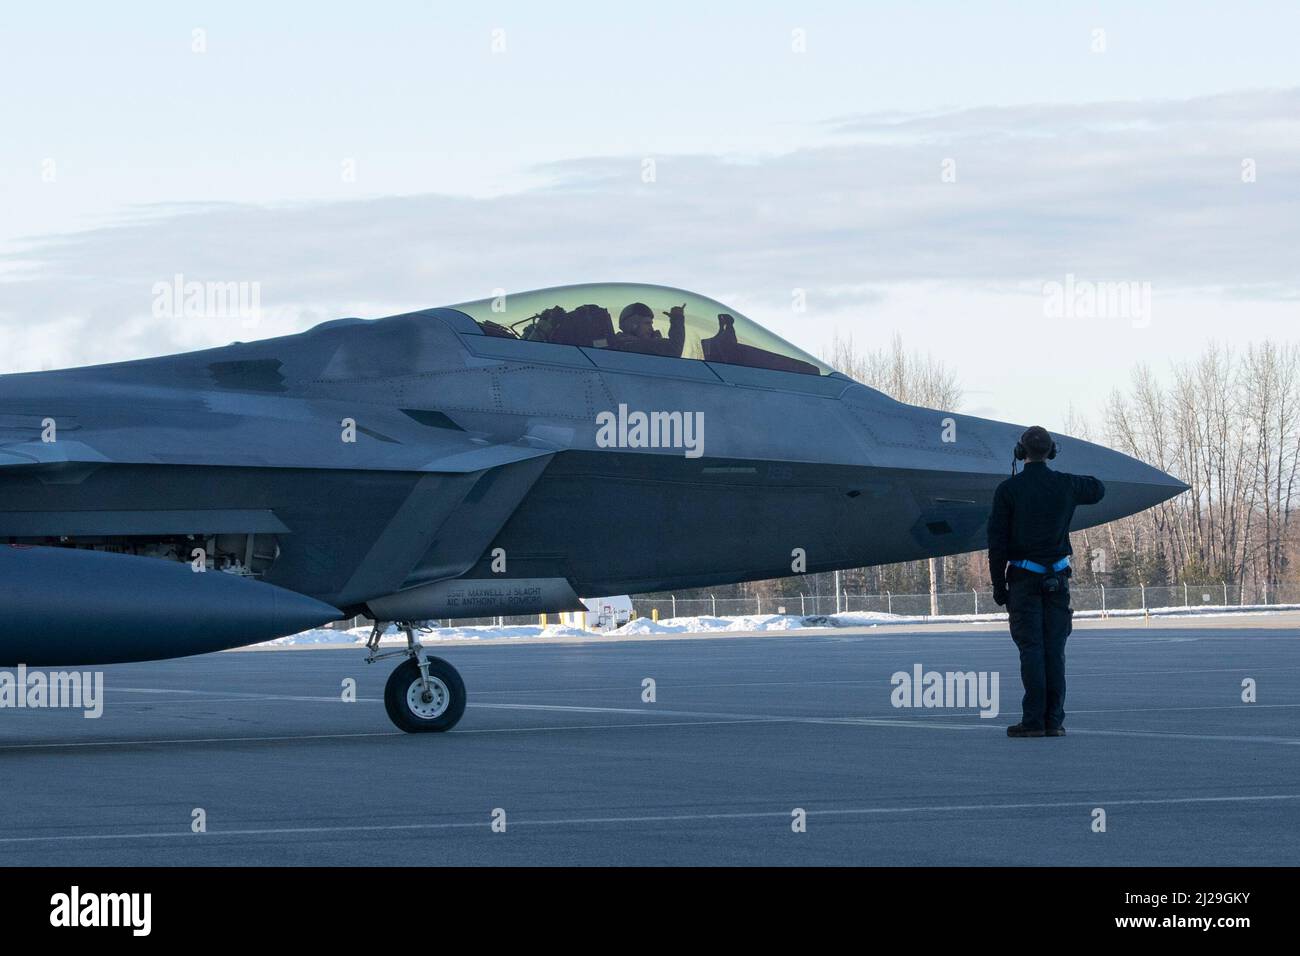 A U.S. Air Force Airman, a 525th Aircraft Maintenance Unit crew chief, marshals an F-22 Raptor during Polar Force 22-4 at Joint Base Elmendorf-Richardson, Alaska, March 30, 2022. The F-22 Raptor is celebrating its 25th anniversary on April 9 and was designed to project air dominance, provide an exponential leap in warfighting capabilities, and defeat threats against our nation’s Air Force, Army, Navy, and Marine Corps. U.S. forces will fly, sail, and operate anywhere international law allows, at the time and tempo of our choosing. (U.S. Air Force photo by Senior Airman Emily Farnsworth) Stock Photo